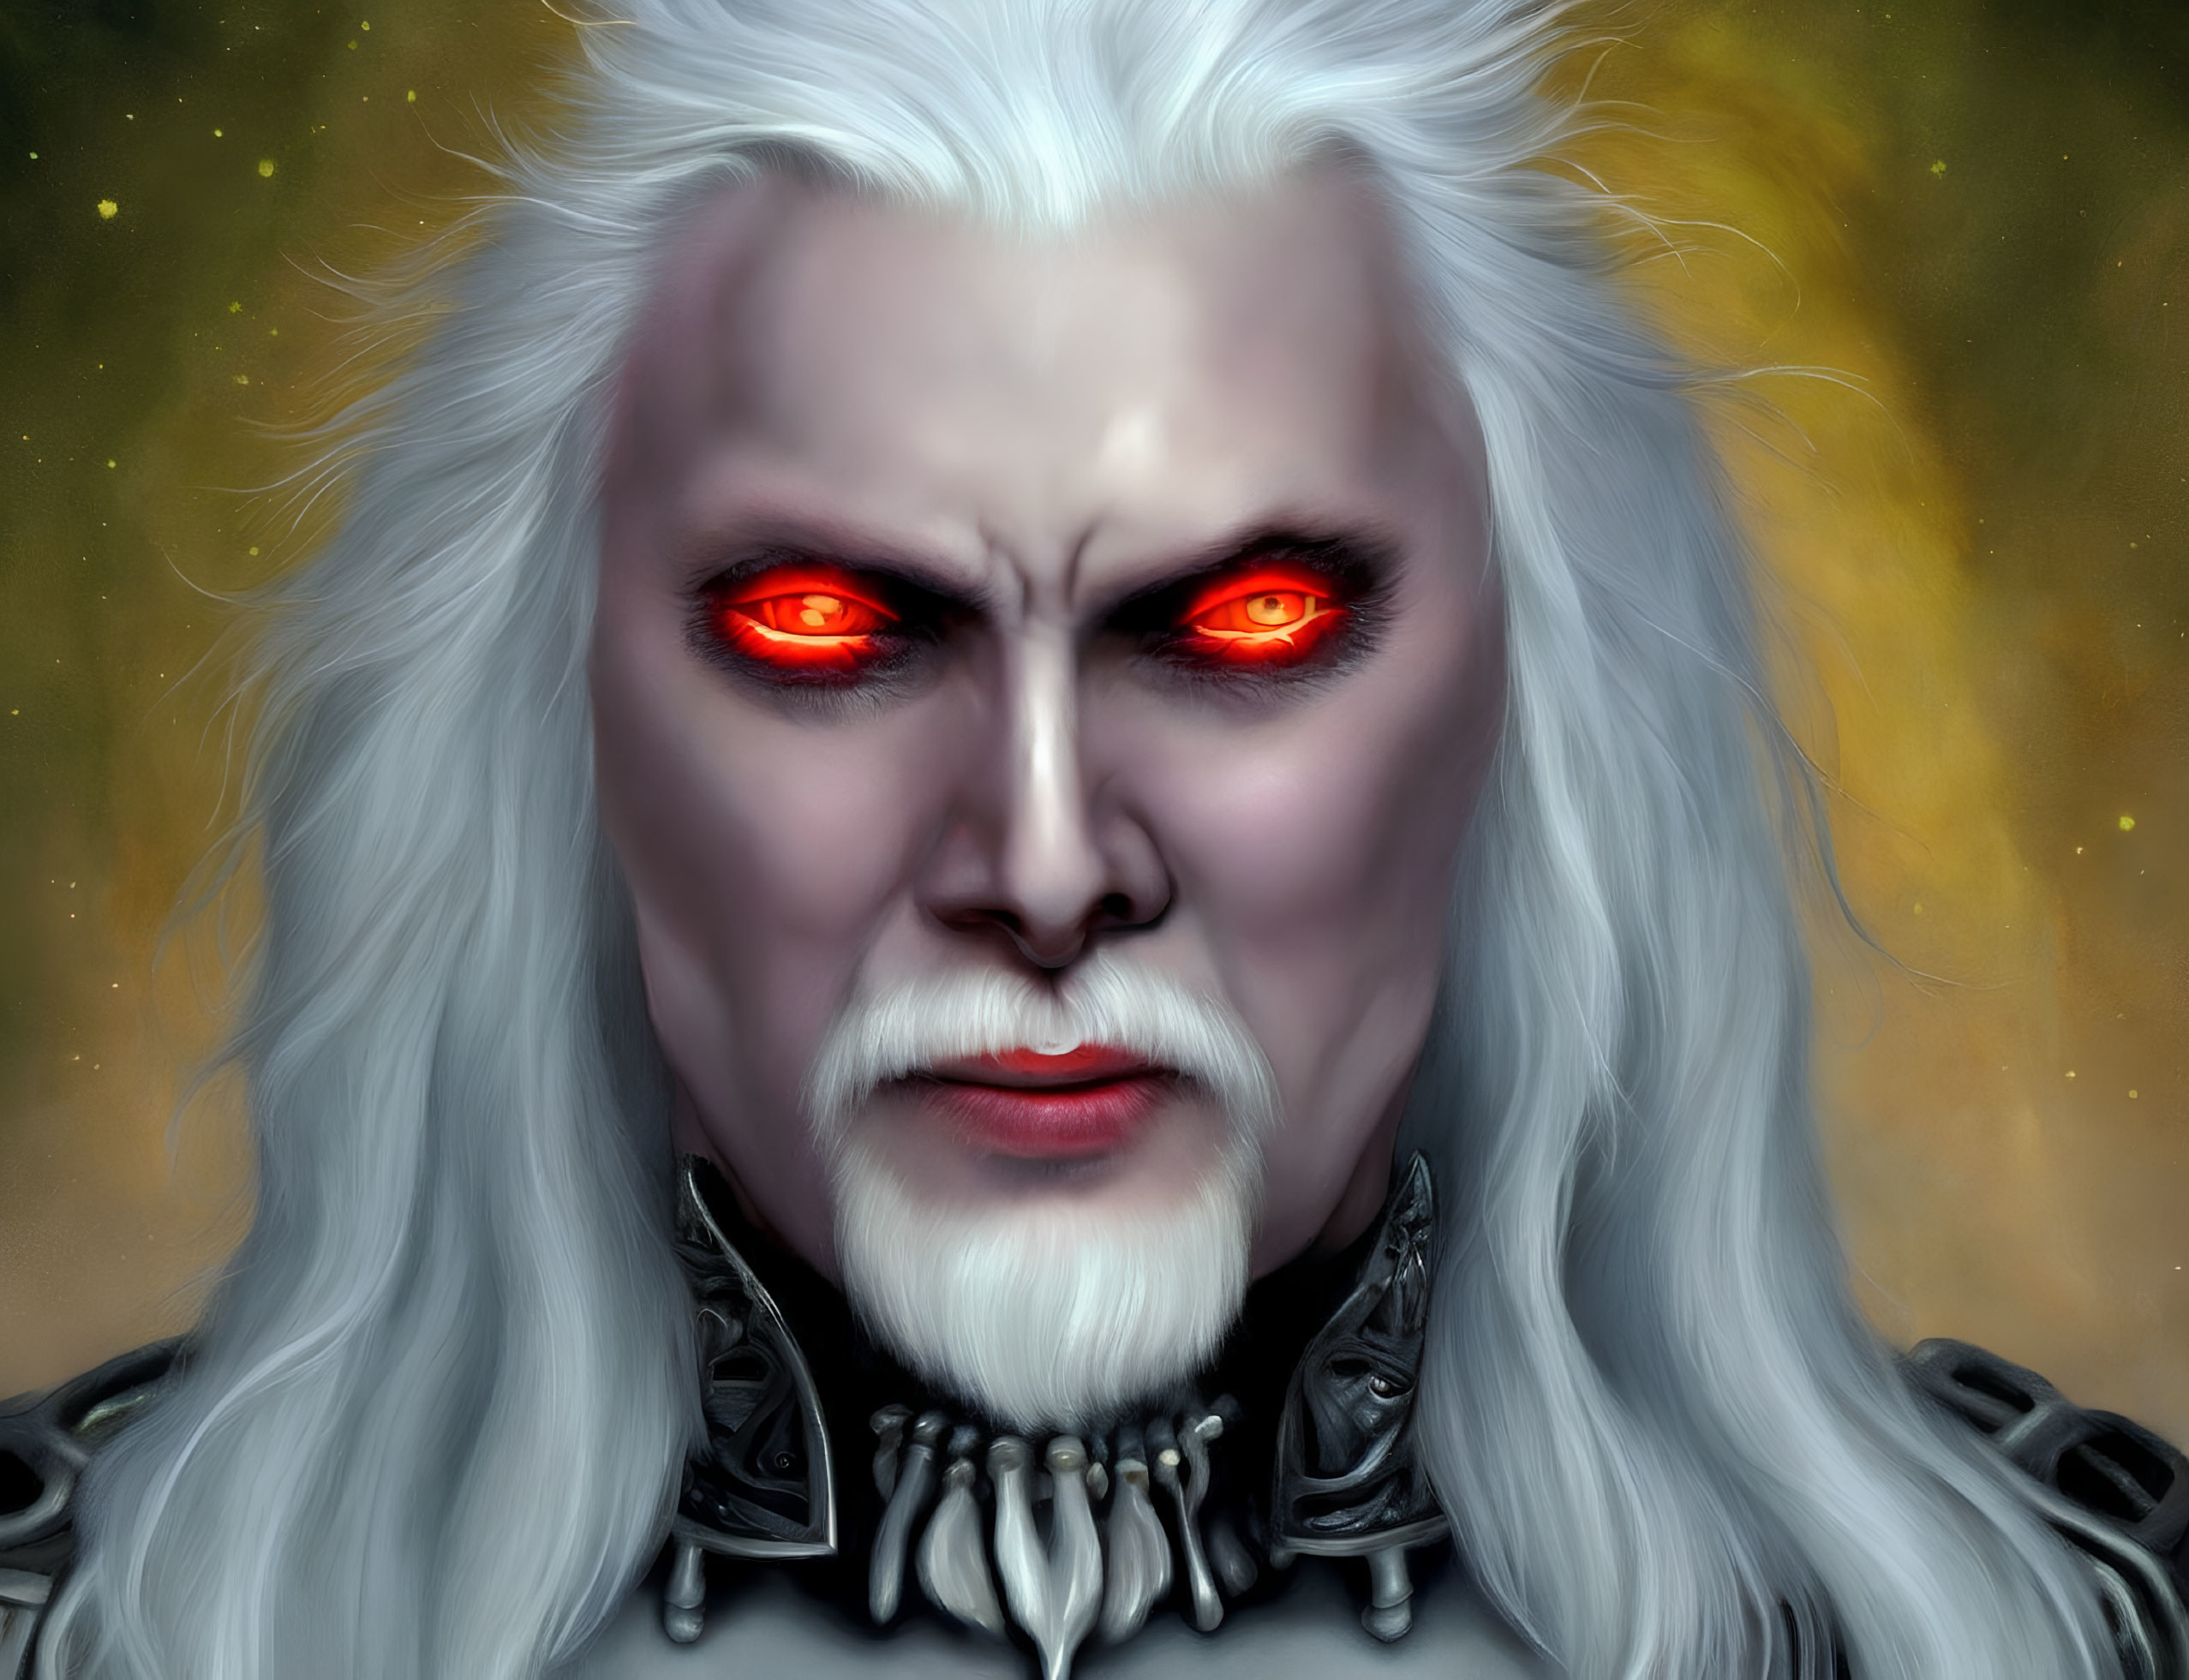 Fantasy character portrait with red eyes, white hair, and pale skin on golden background